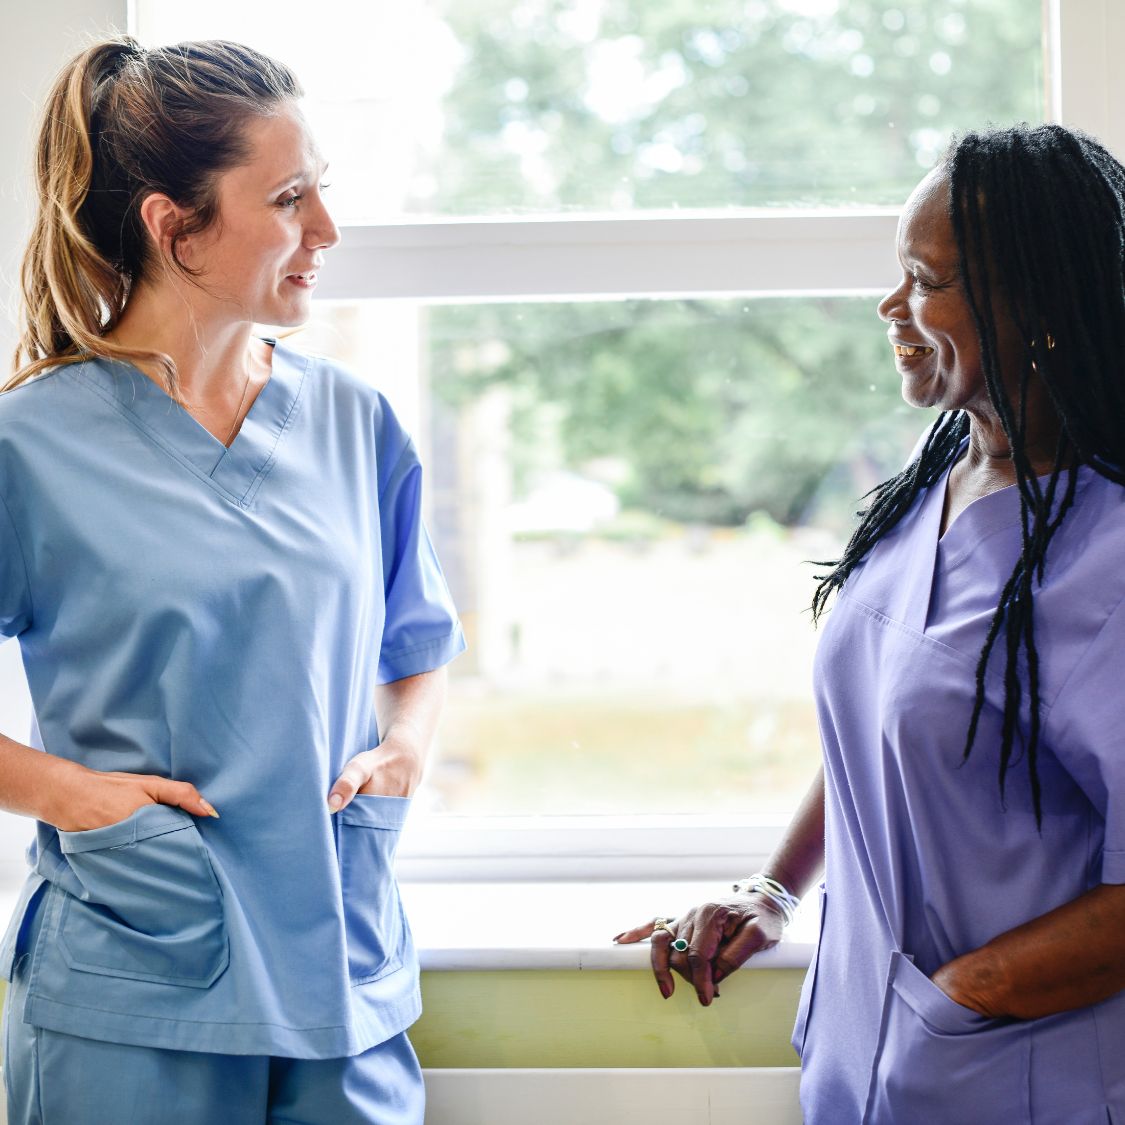 Pros and Cons of Pursuing a Career in Nursing